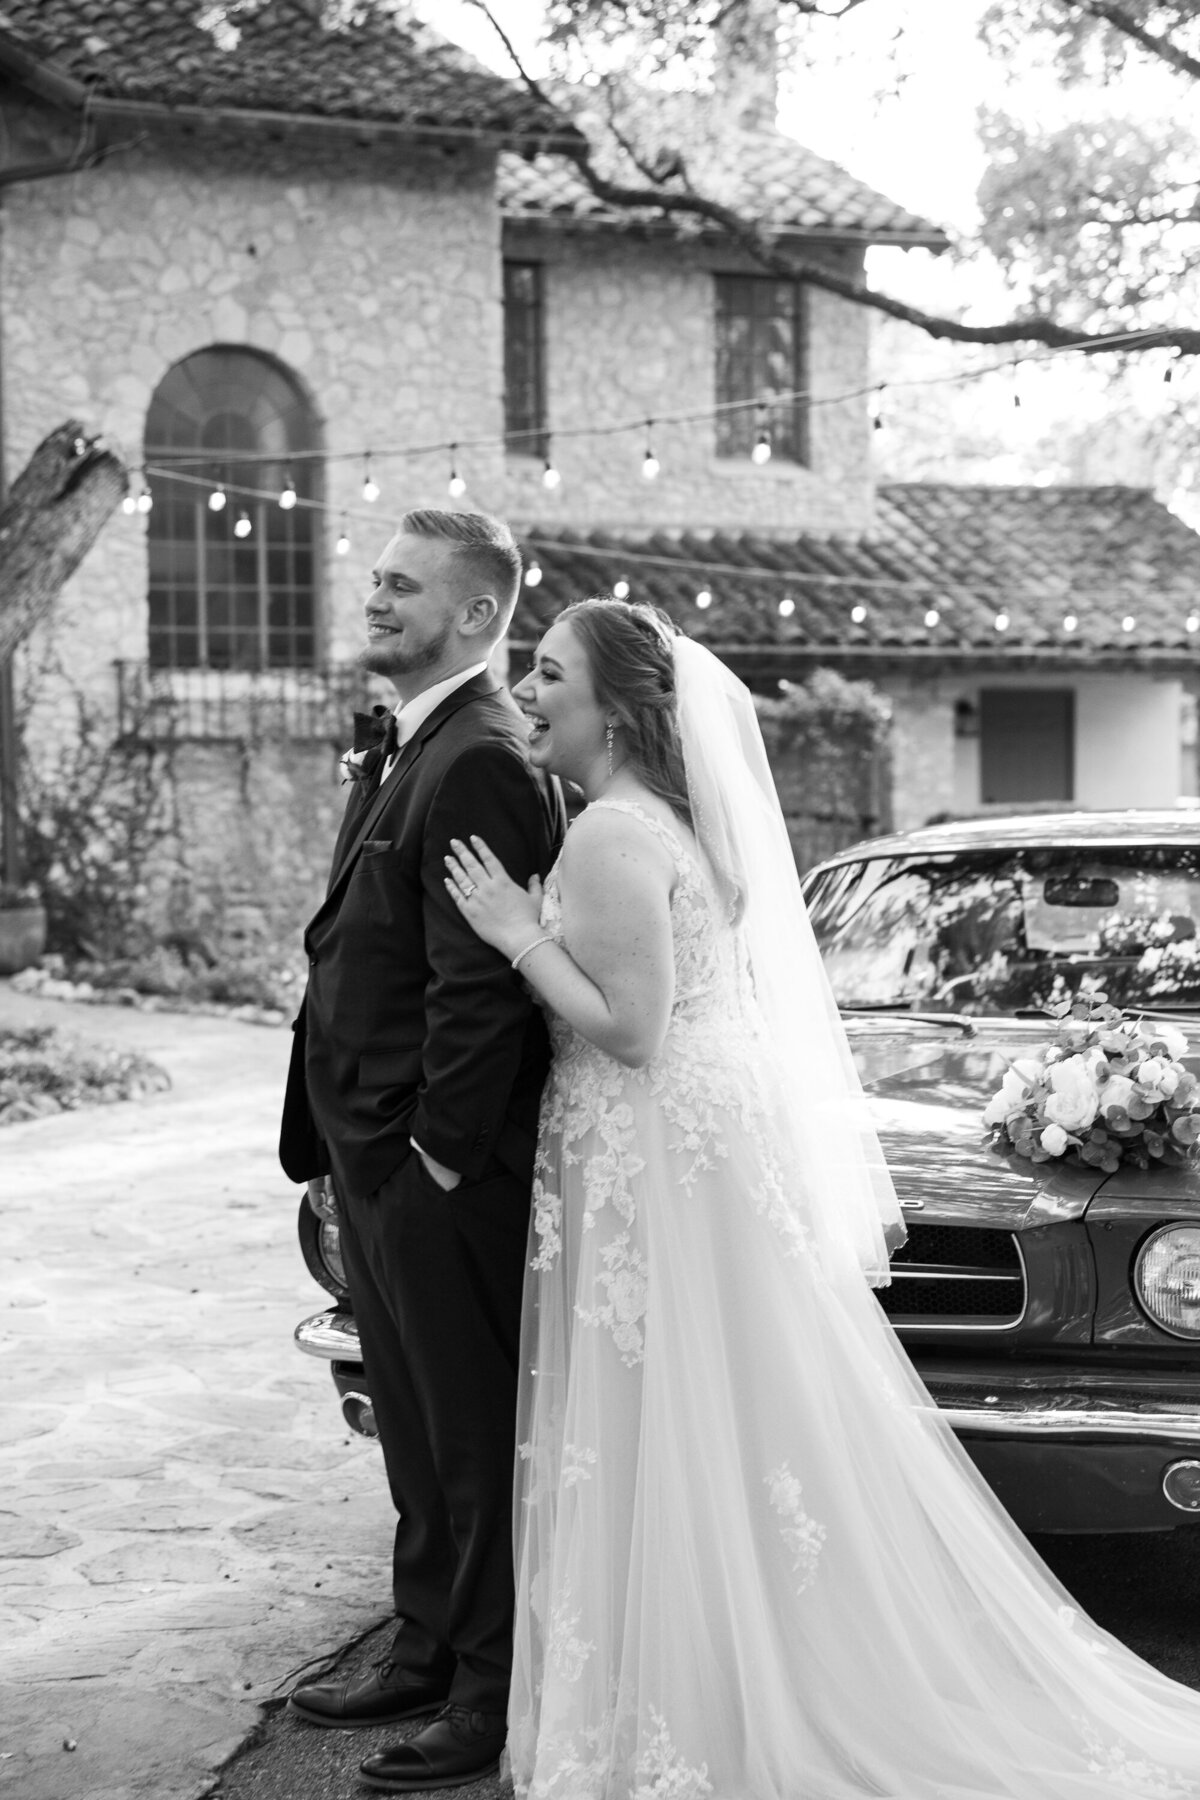 Austin wedding photographer capturing a bride and groom standing next to a vintage car.